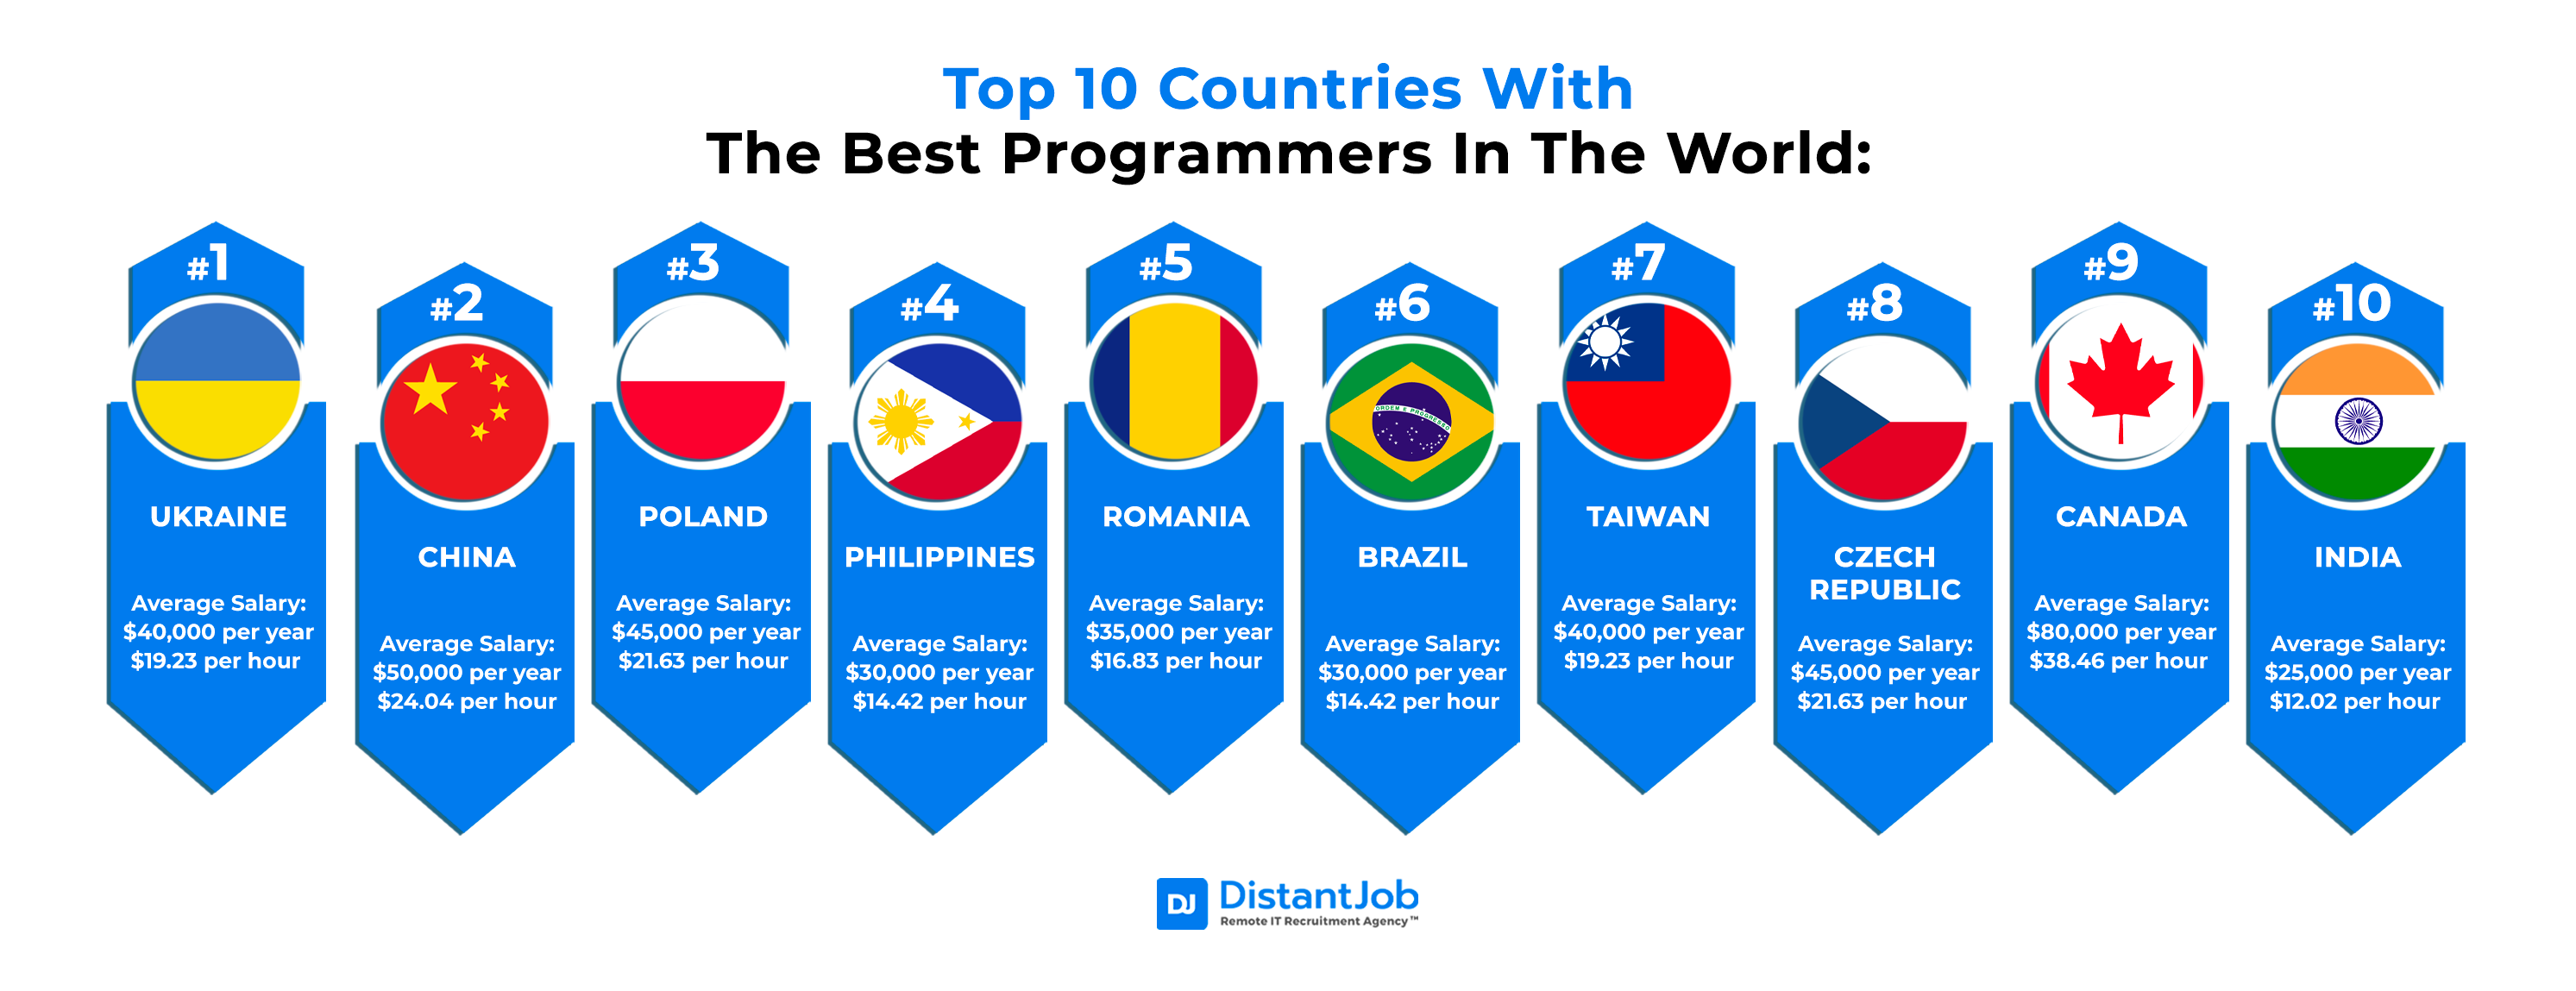 Top 10 countries with the best programmers in the world